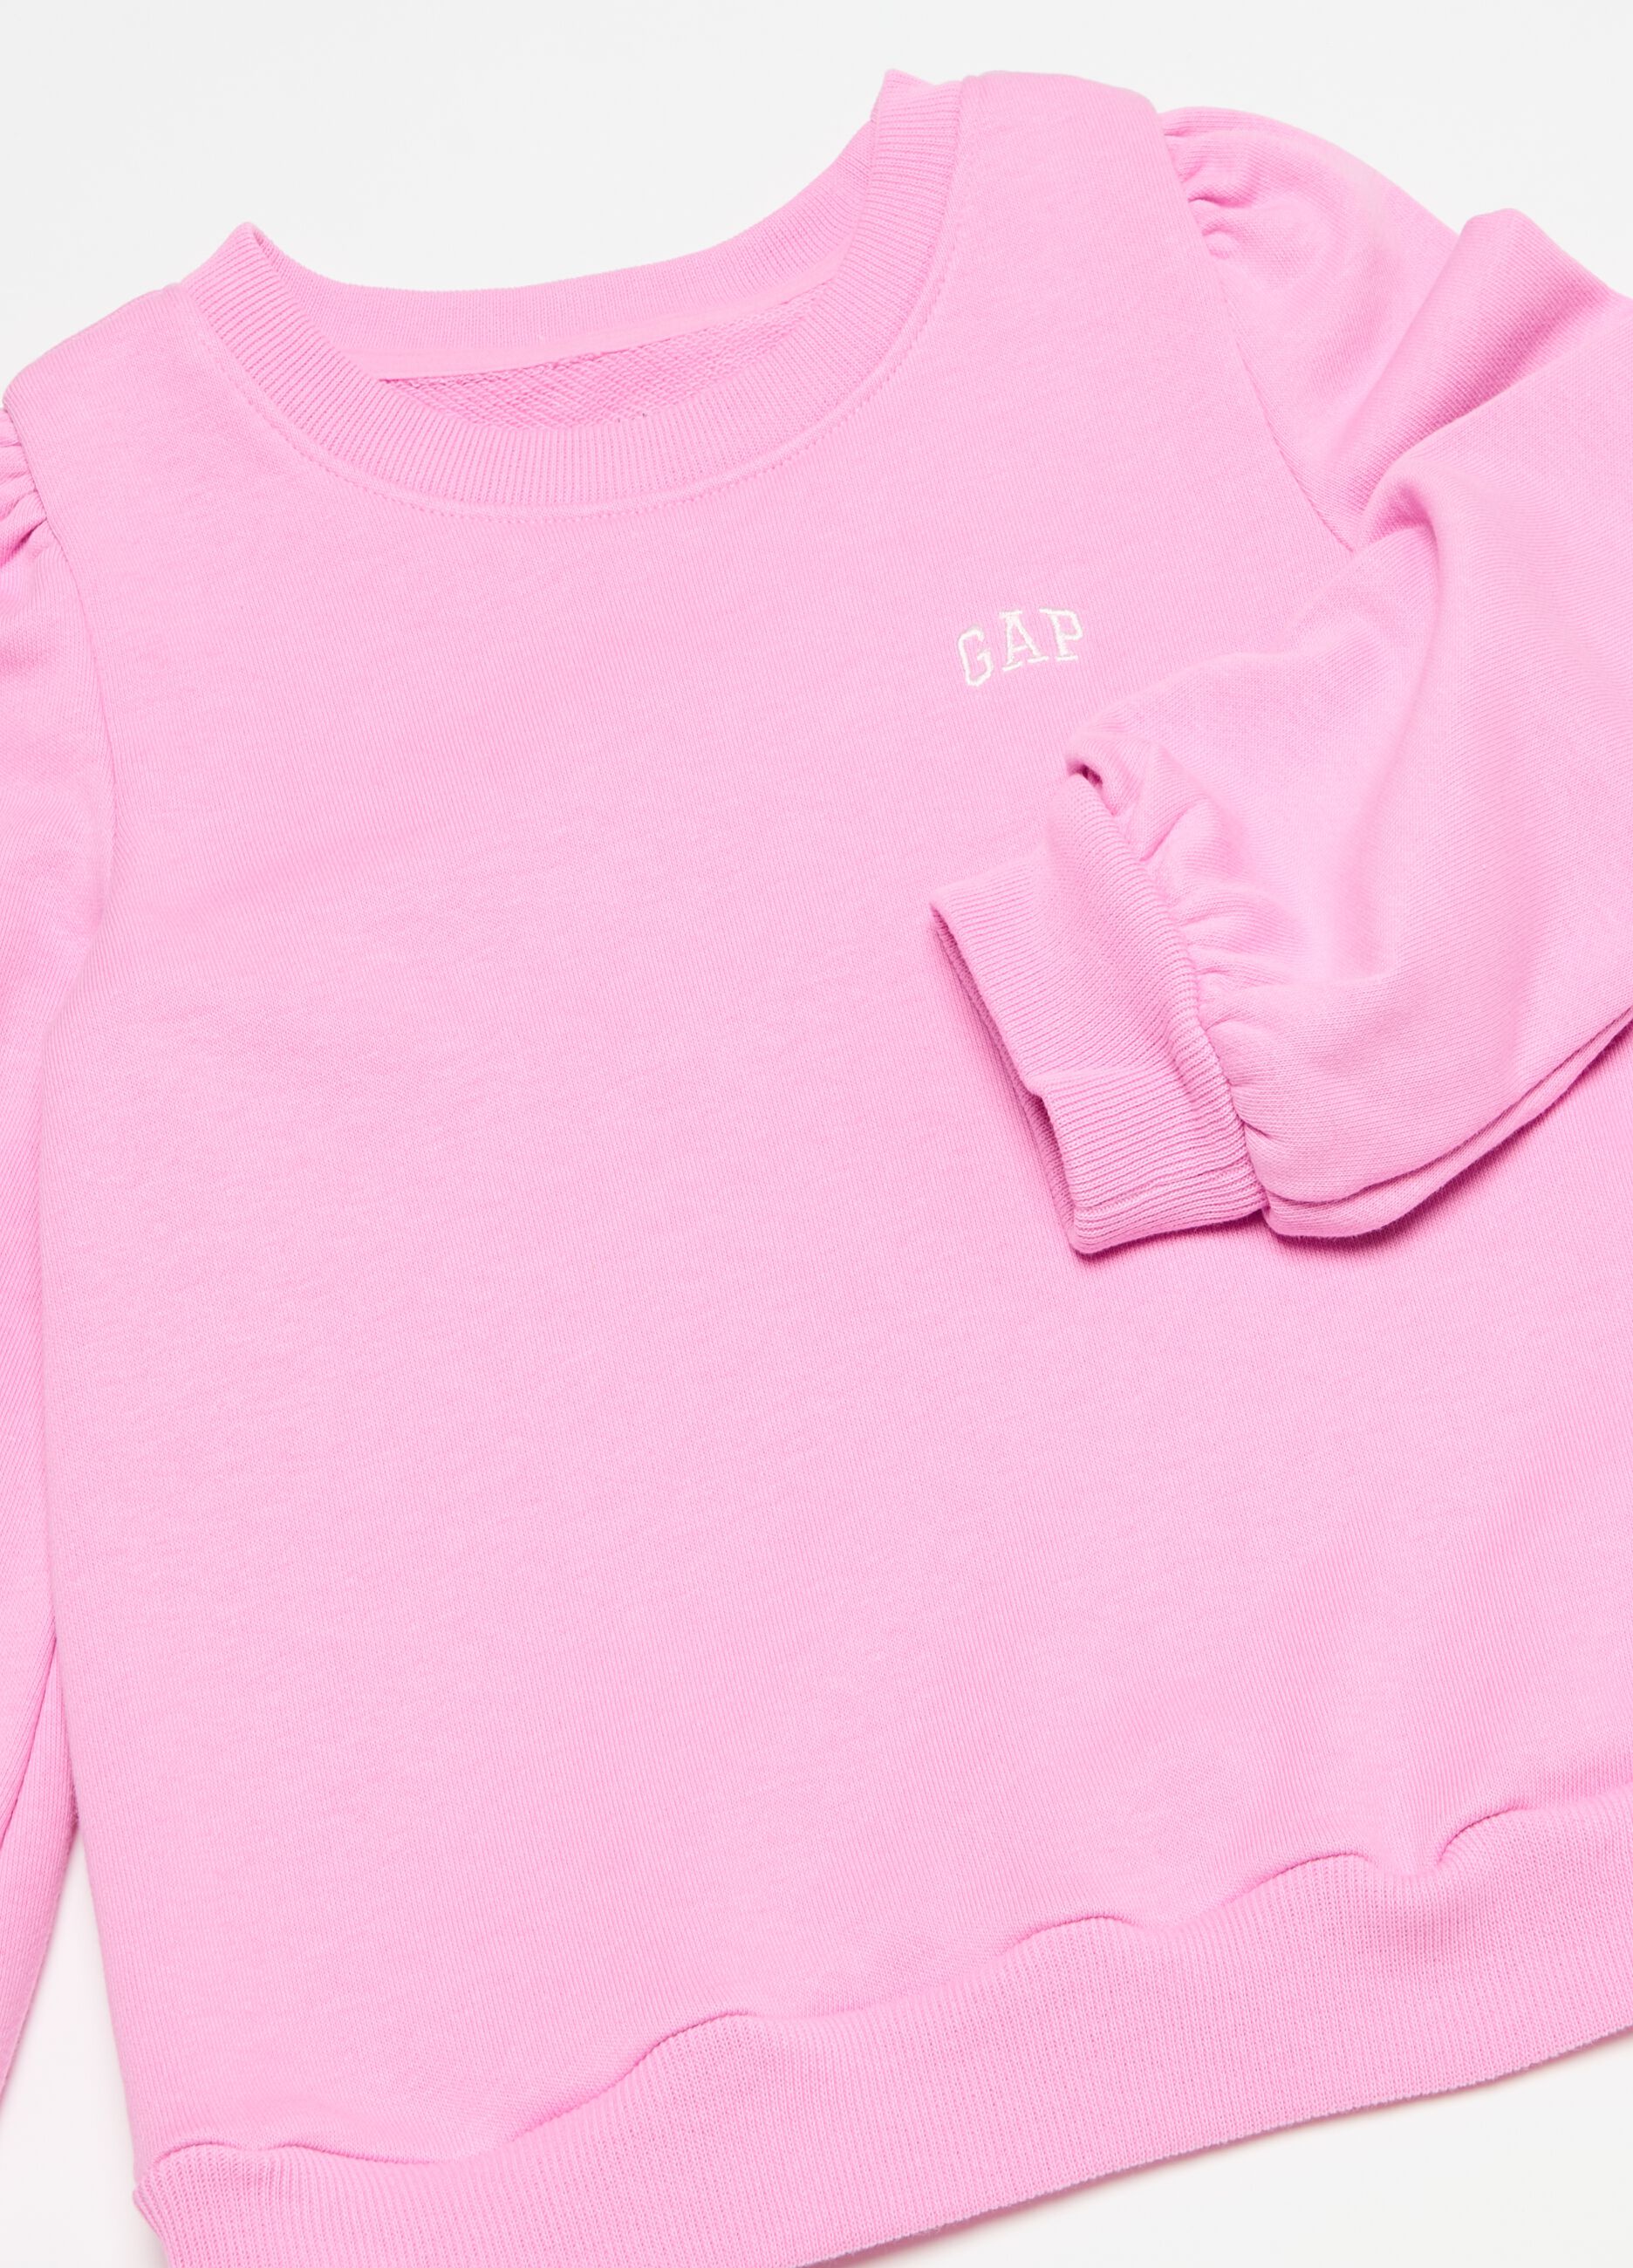 Sweatshirt with logo embroidery and puff sleeves